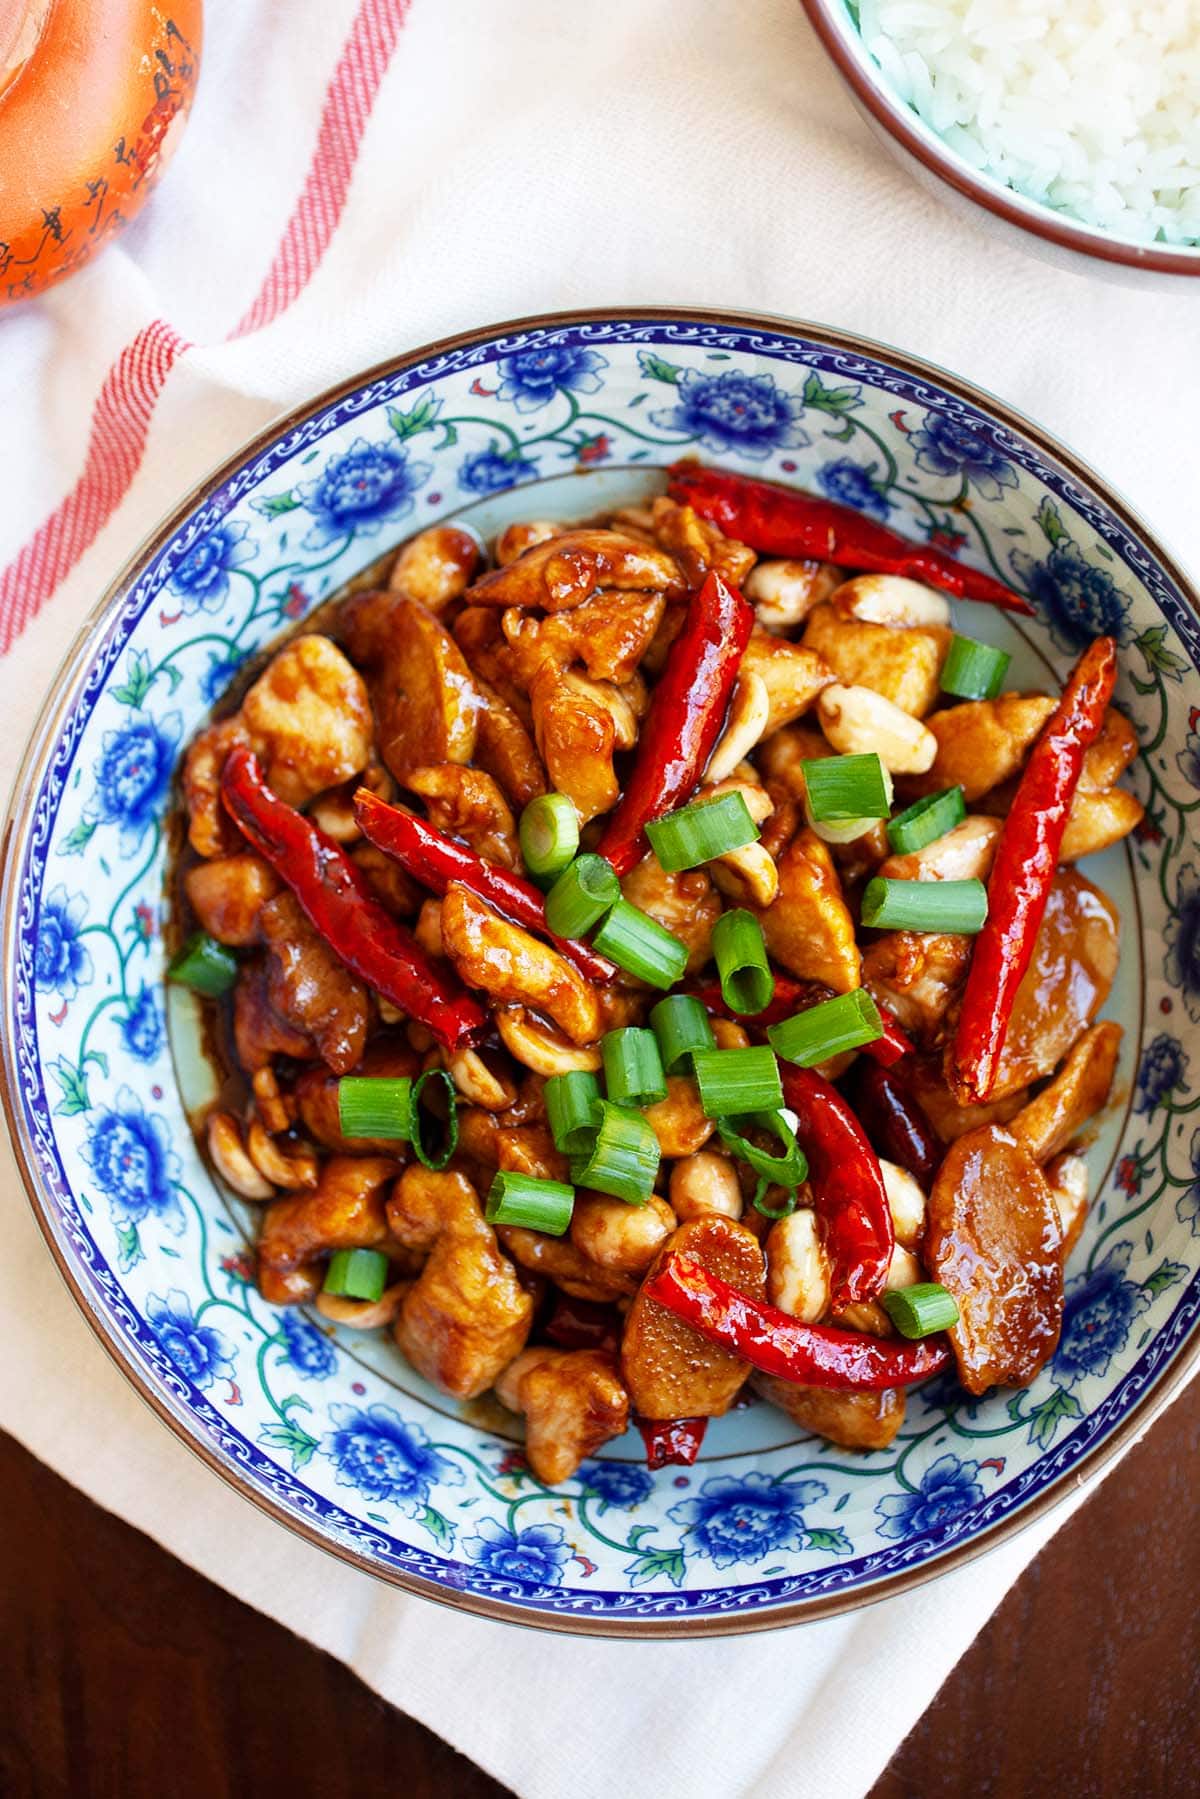 Kung Pao Chicken with dried red chilies, roasted peanuts in Kung Pao Sauce.